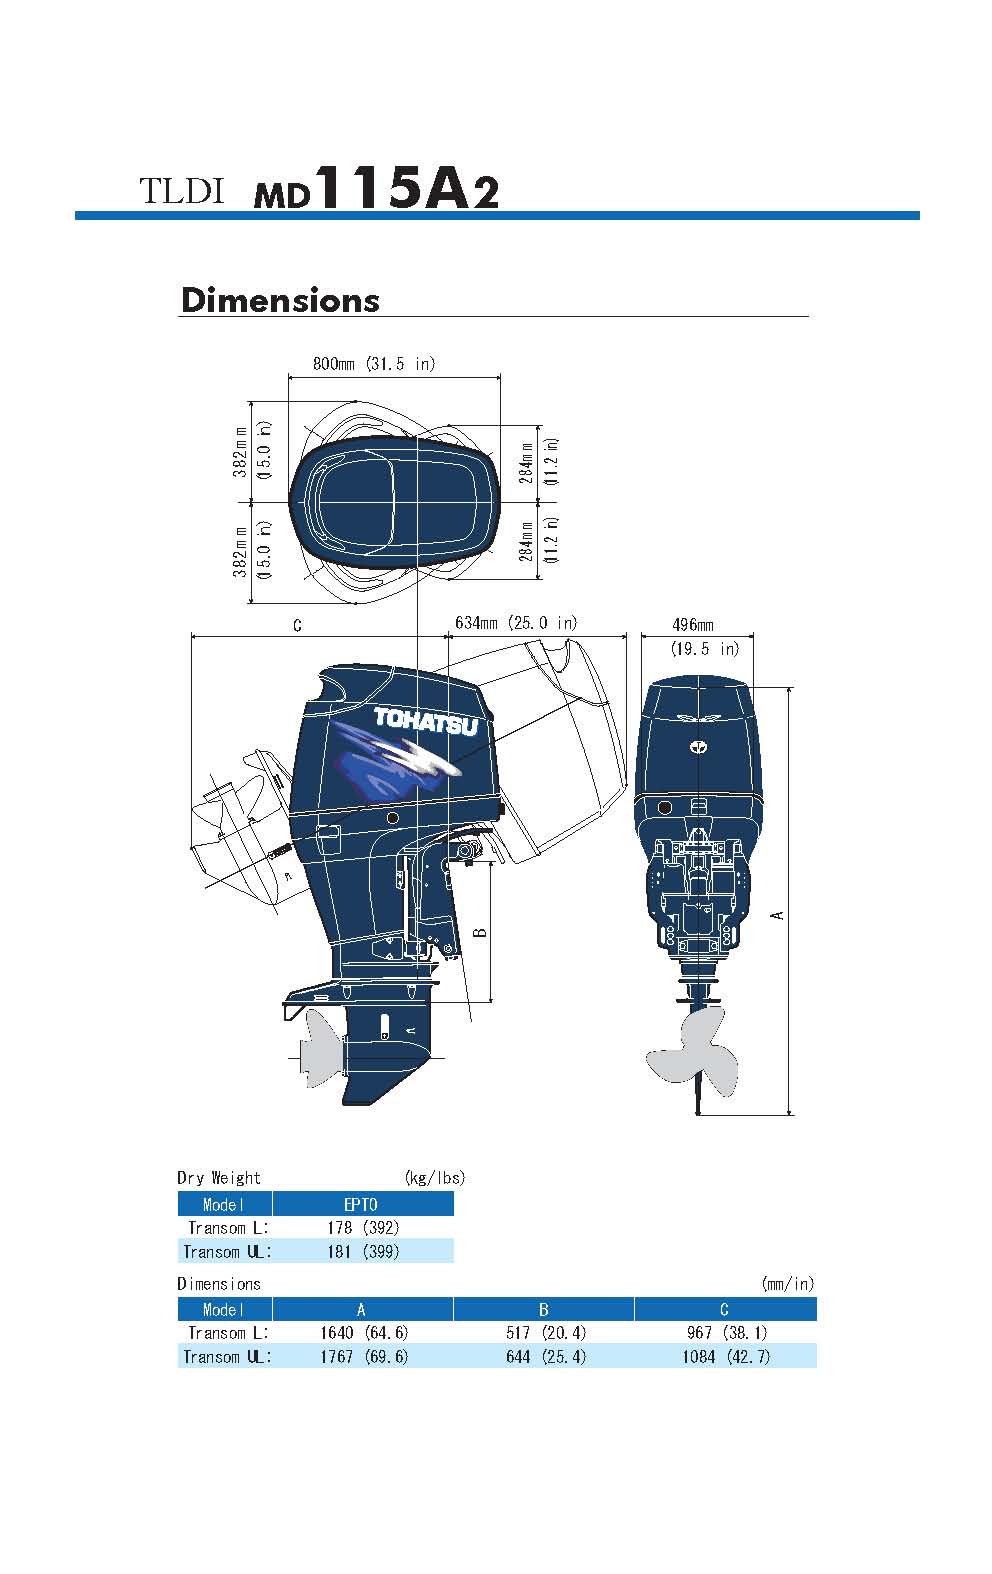 MD 115 Dimensions